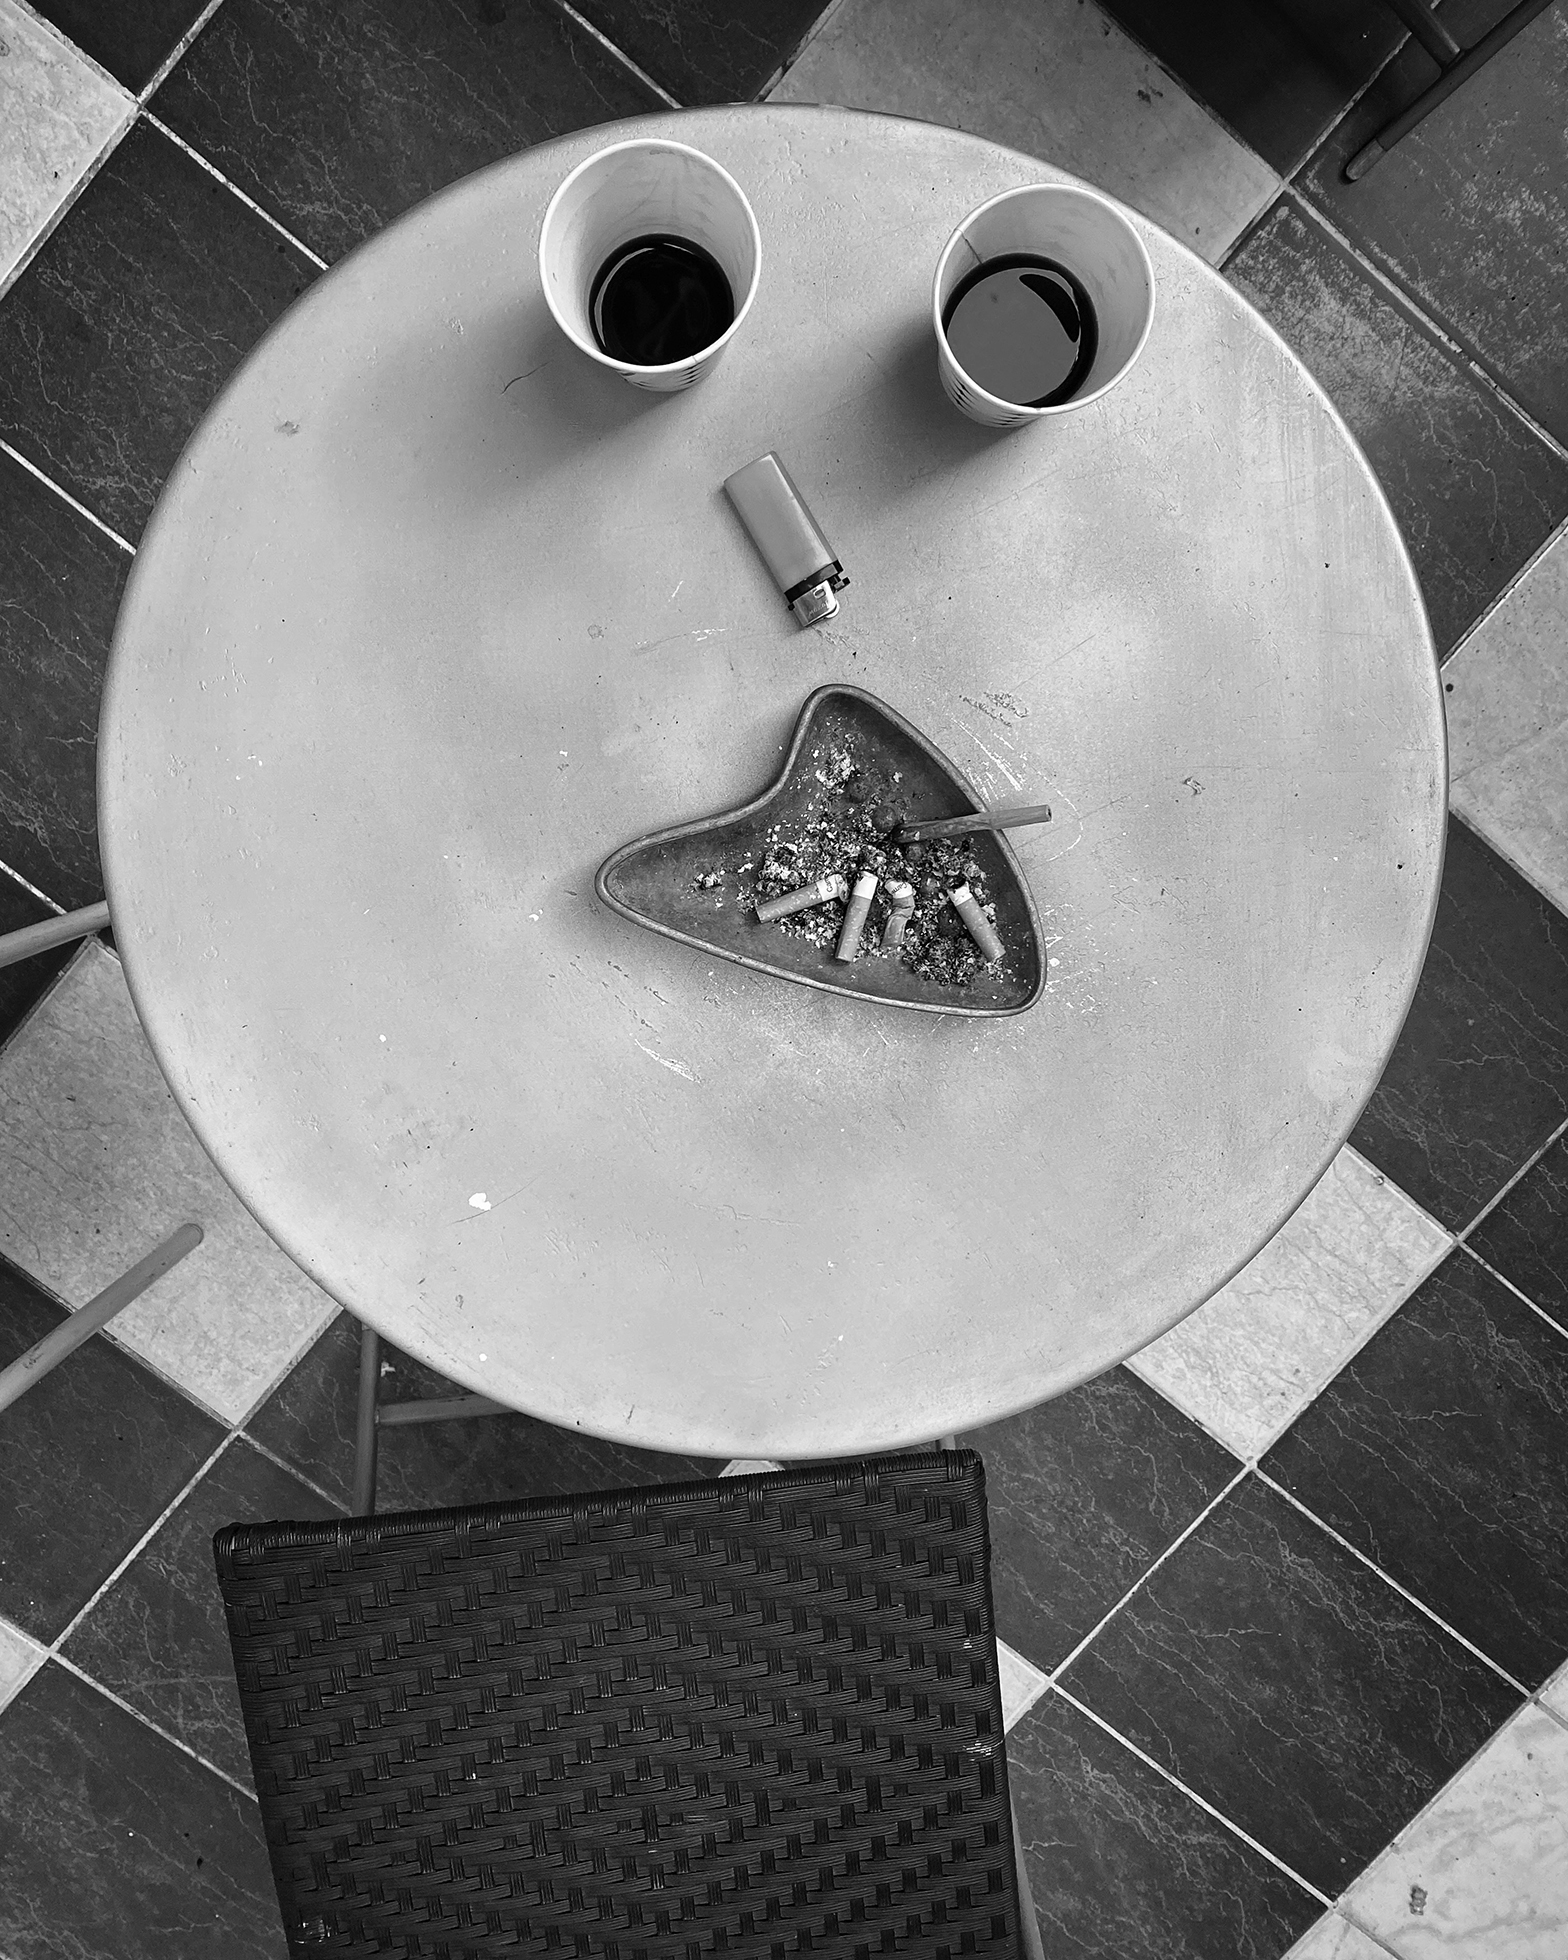 View from above of a round white table against a tiled floor of two contrasting colors. On the table are two disposable coffee cups, a lighter, and an ashtray.